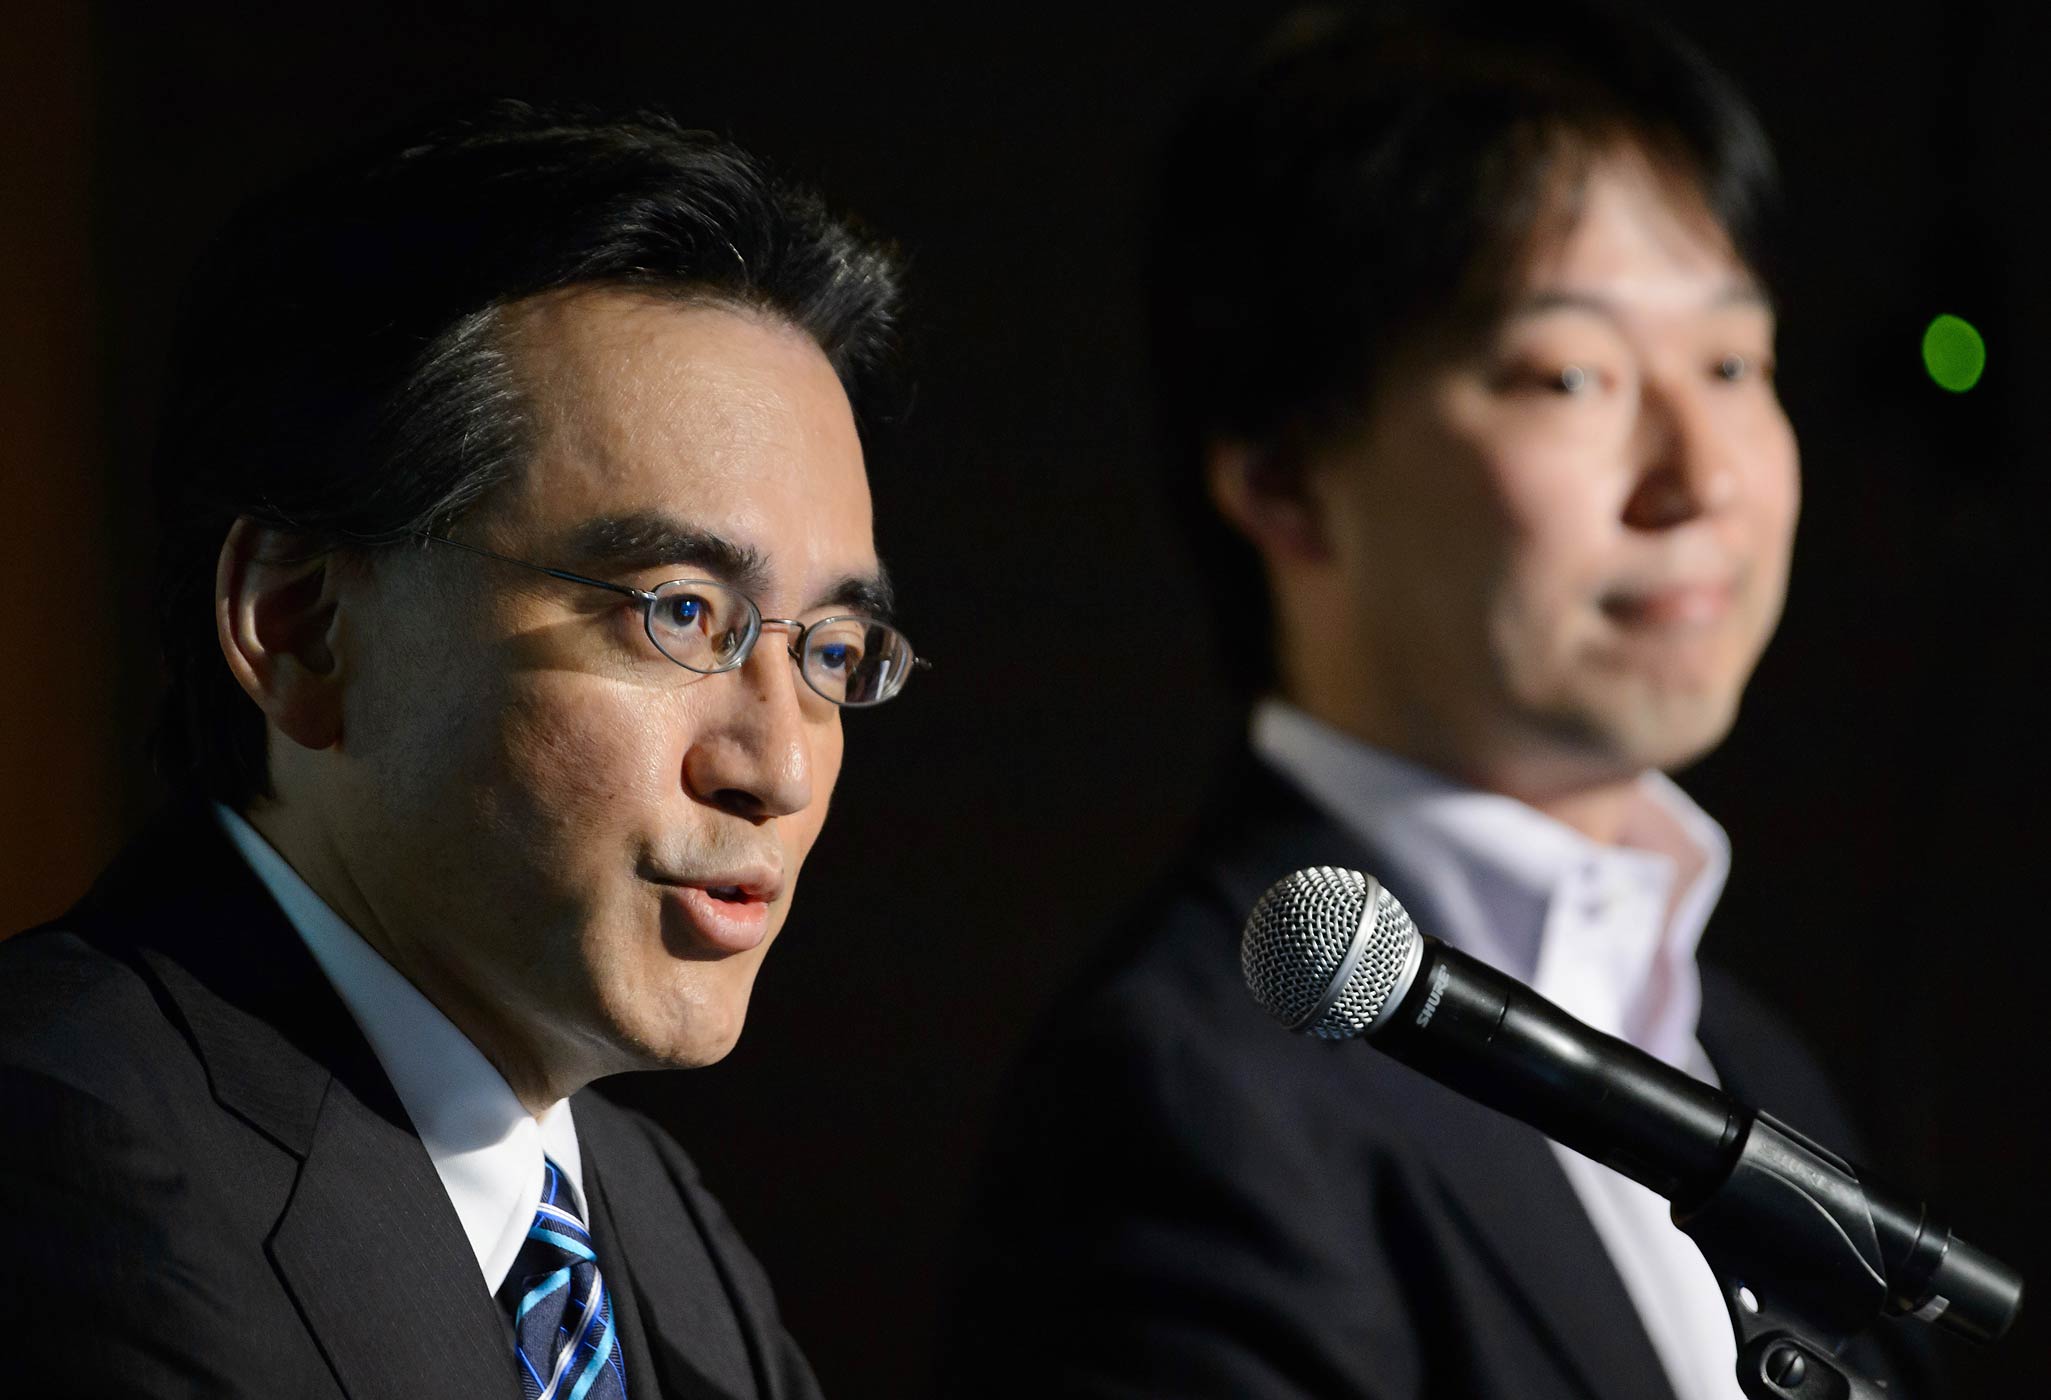 Nintendo President and CEO Satoru Iwata, left, speaks while DeNA Co. President and CEO Isao Moriyasu listens during a joint news conference in Tokyo, Japan, on March 17, 2015. (Akio Kon—Bloomberg/Getty Images)